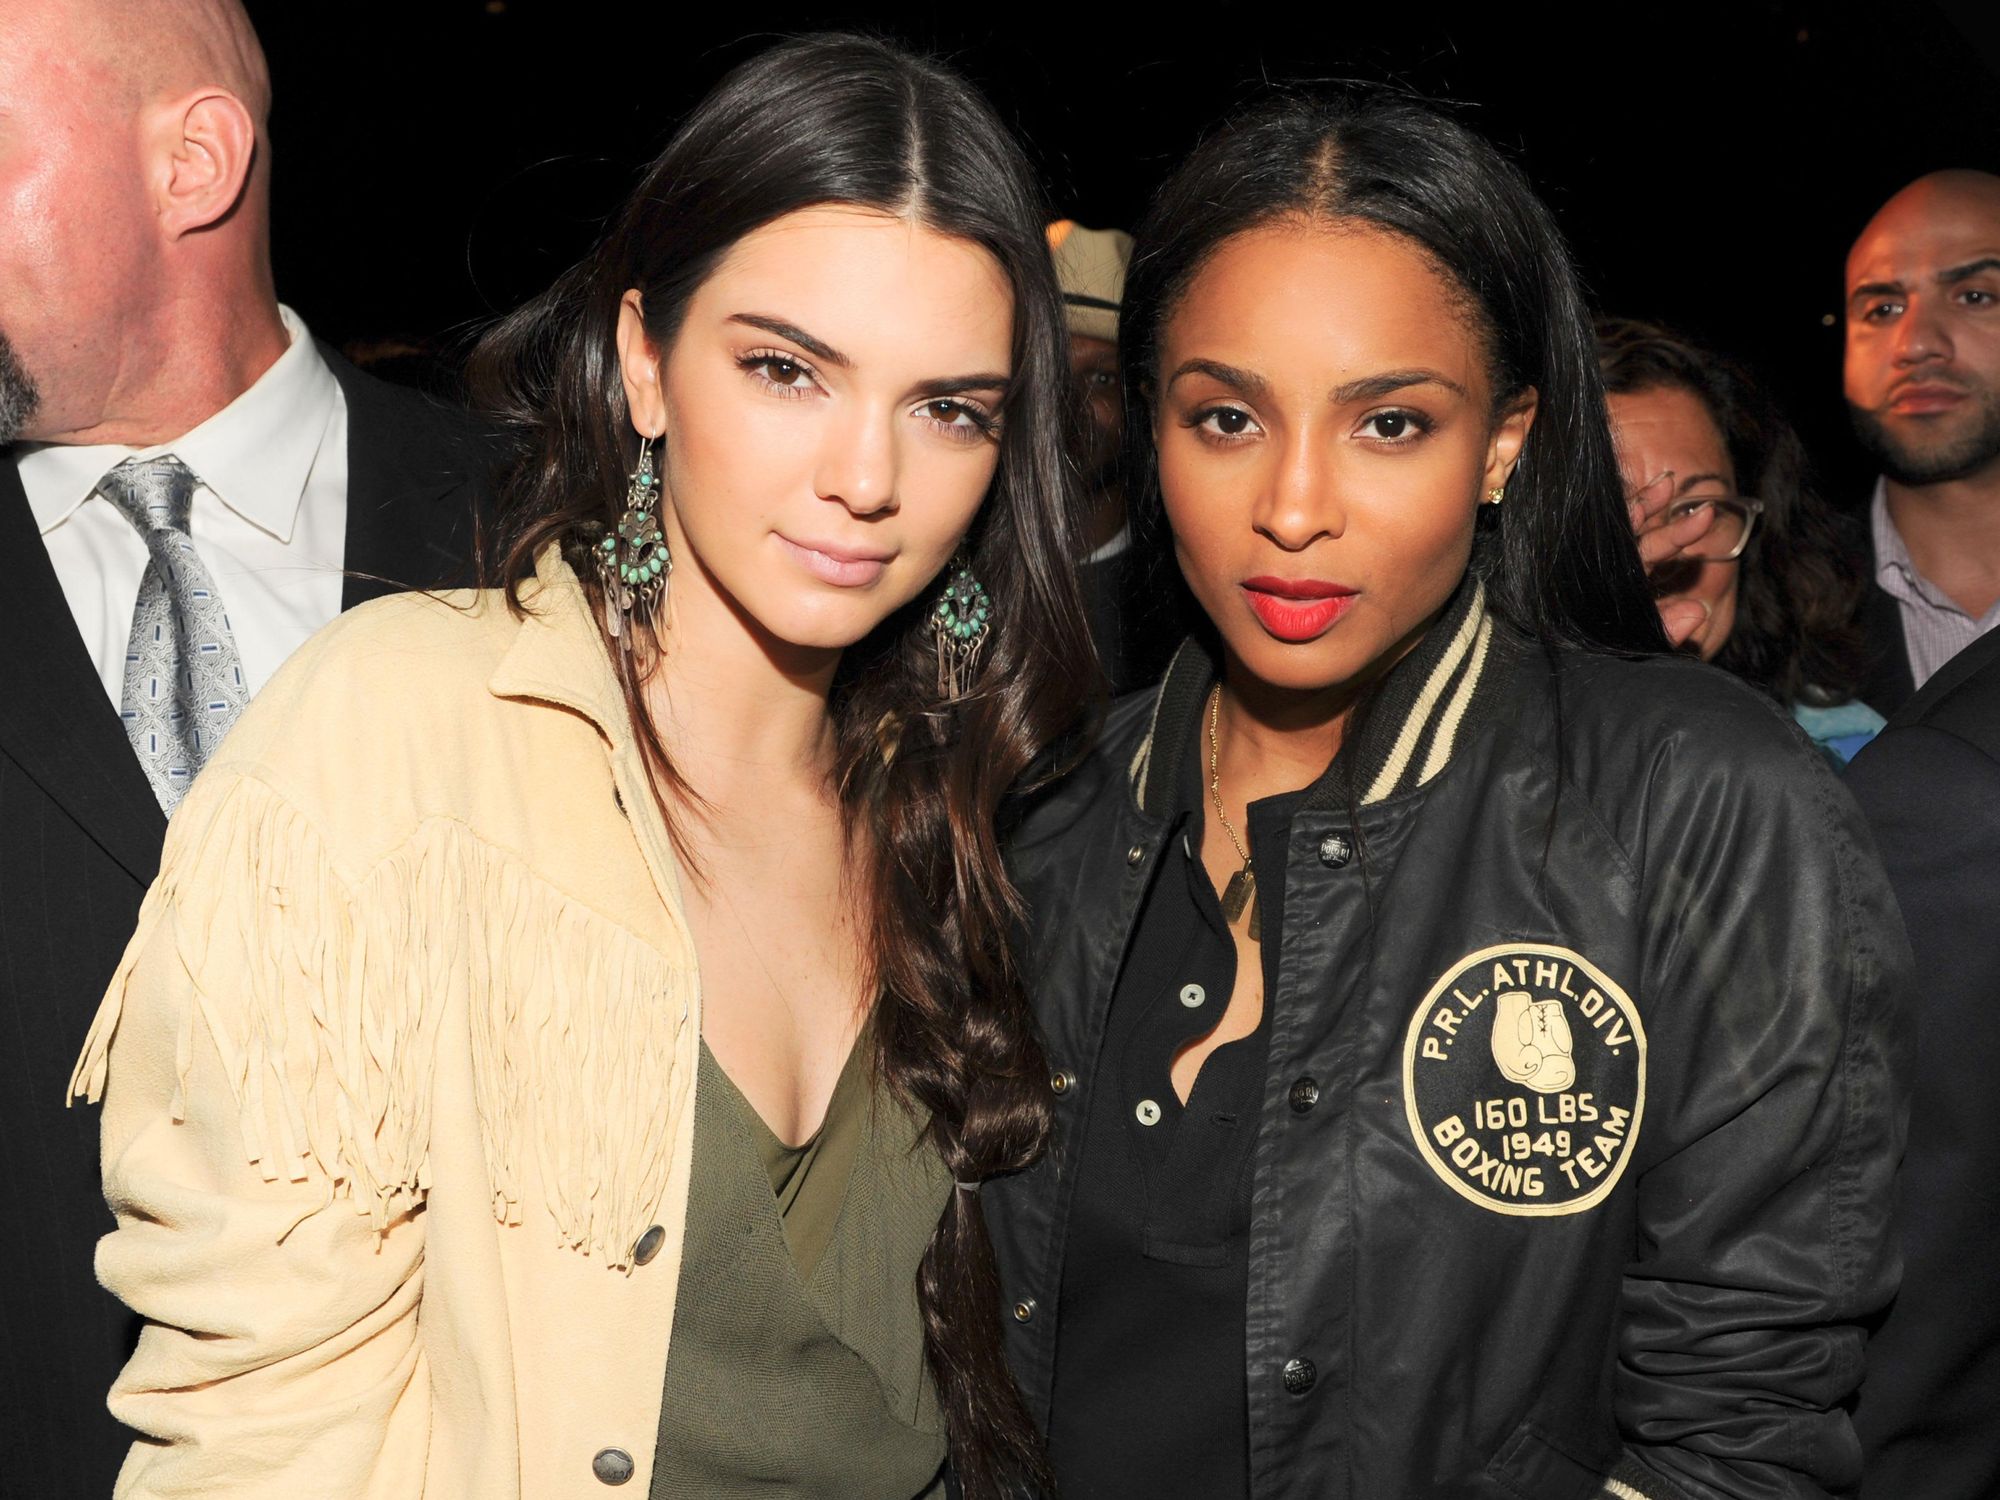 Kendall Jenner and Ciara at Ralph Lauren Polo event